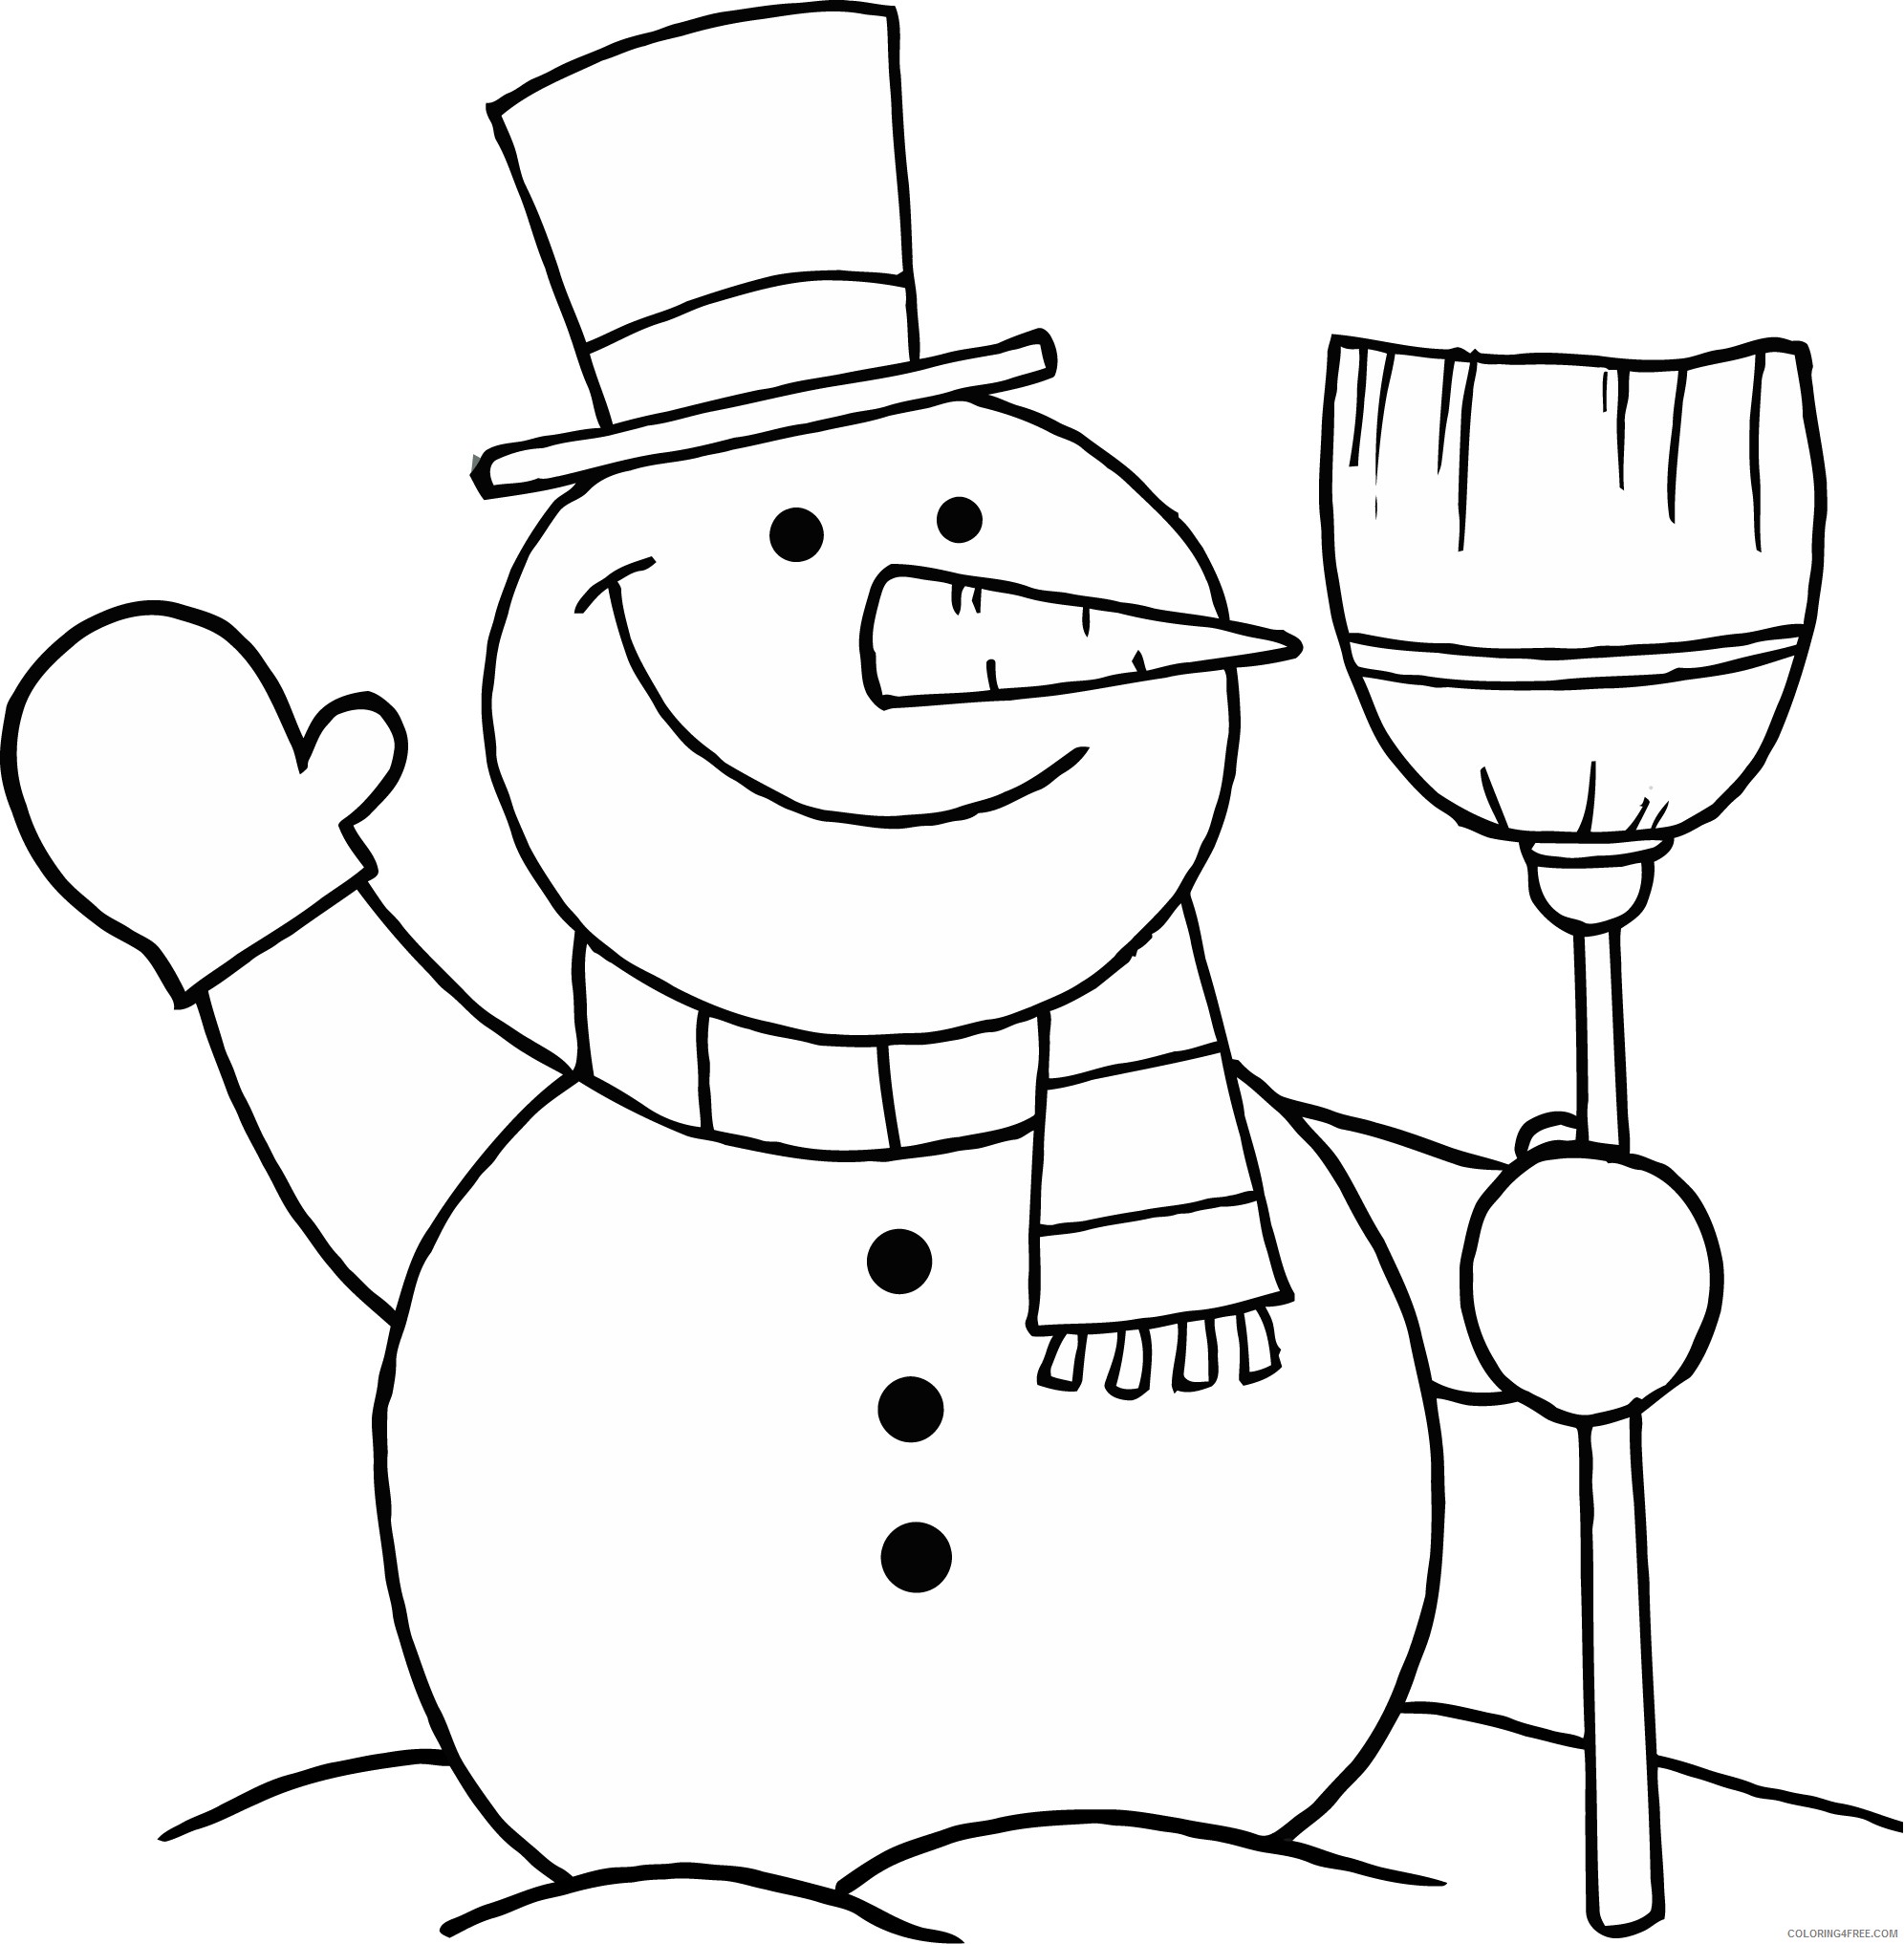 snowman coloring pages with broom Coloring4free